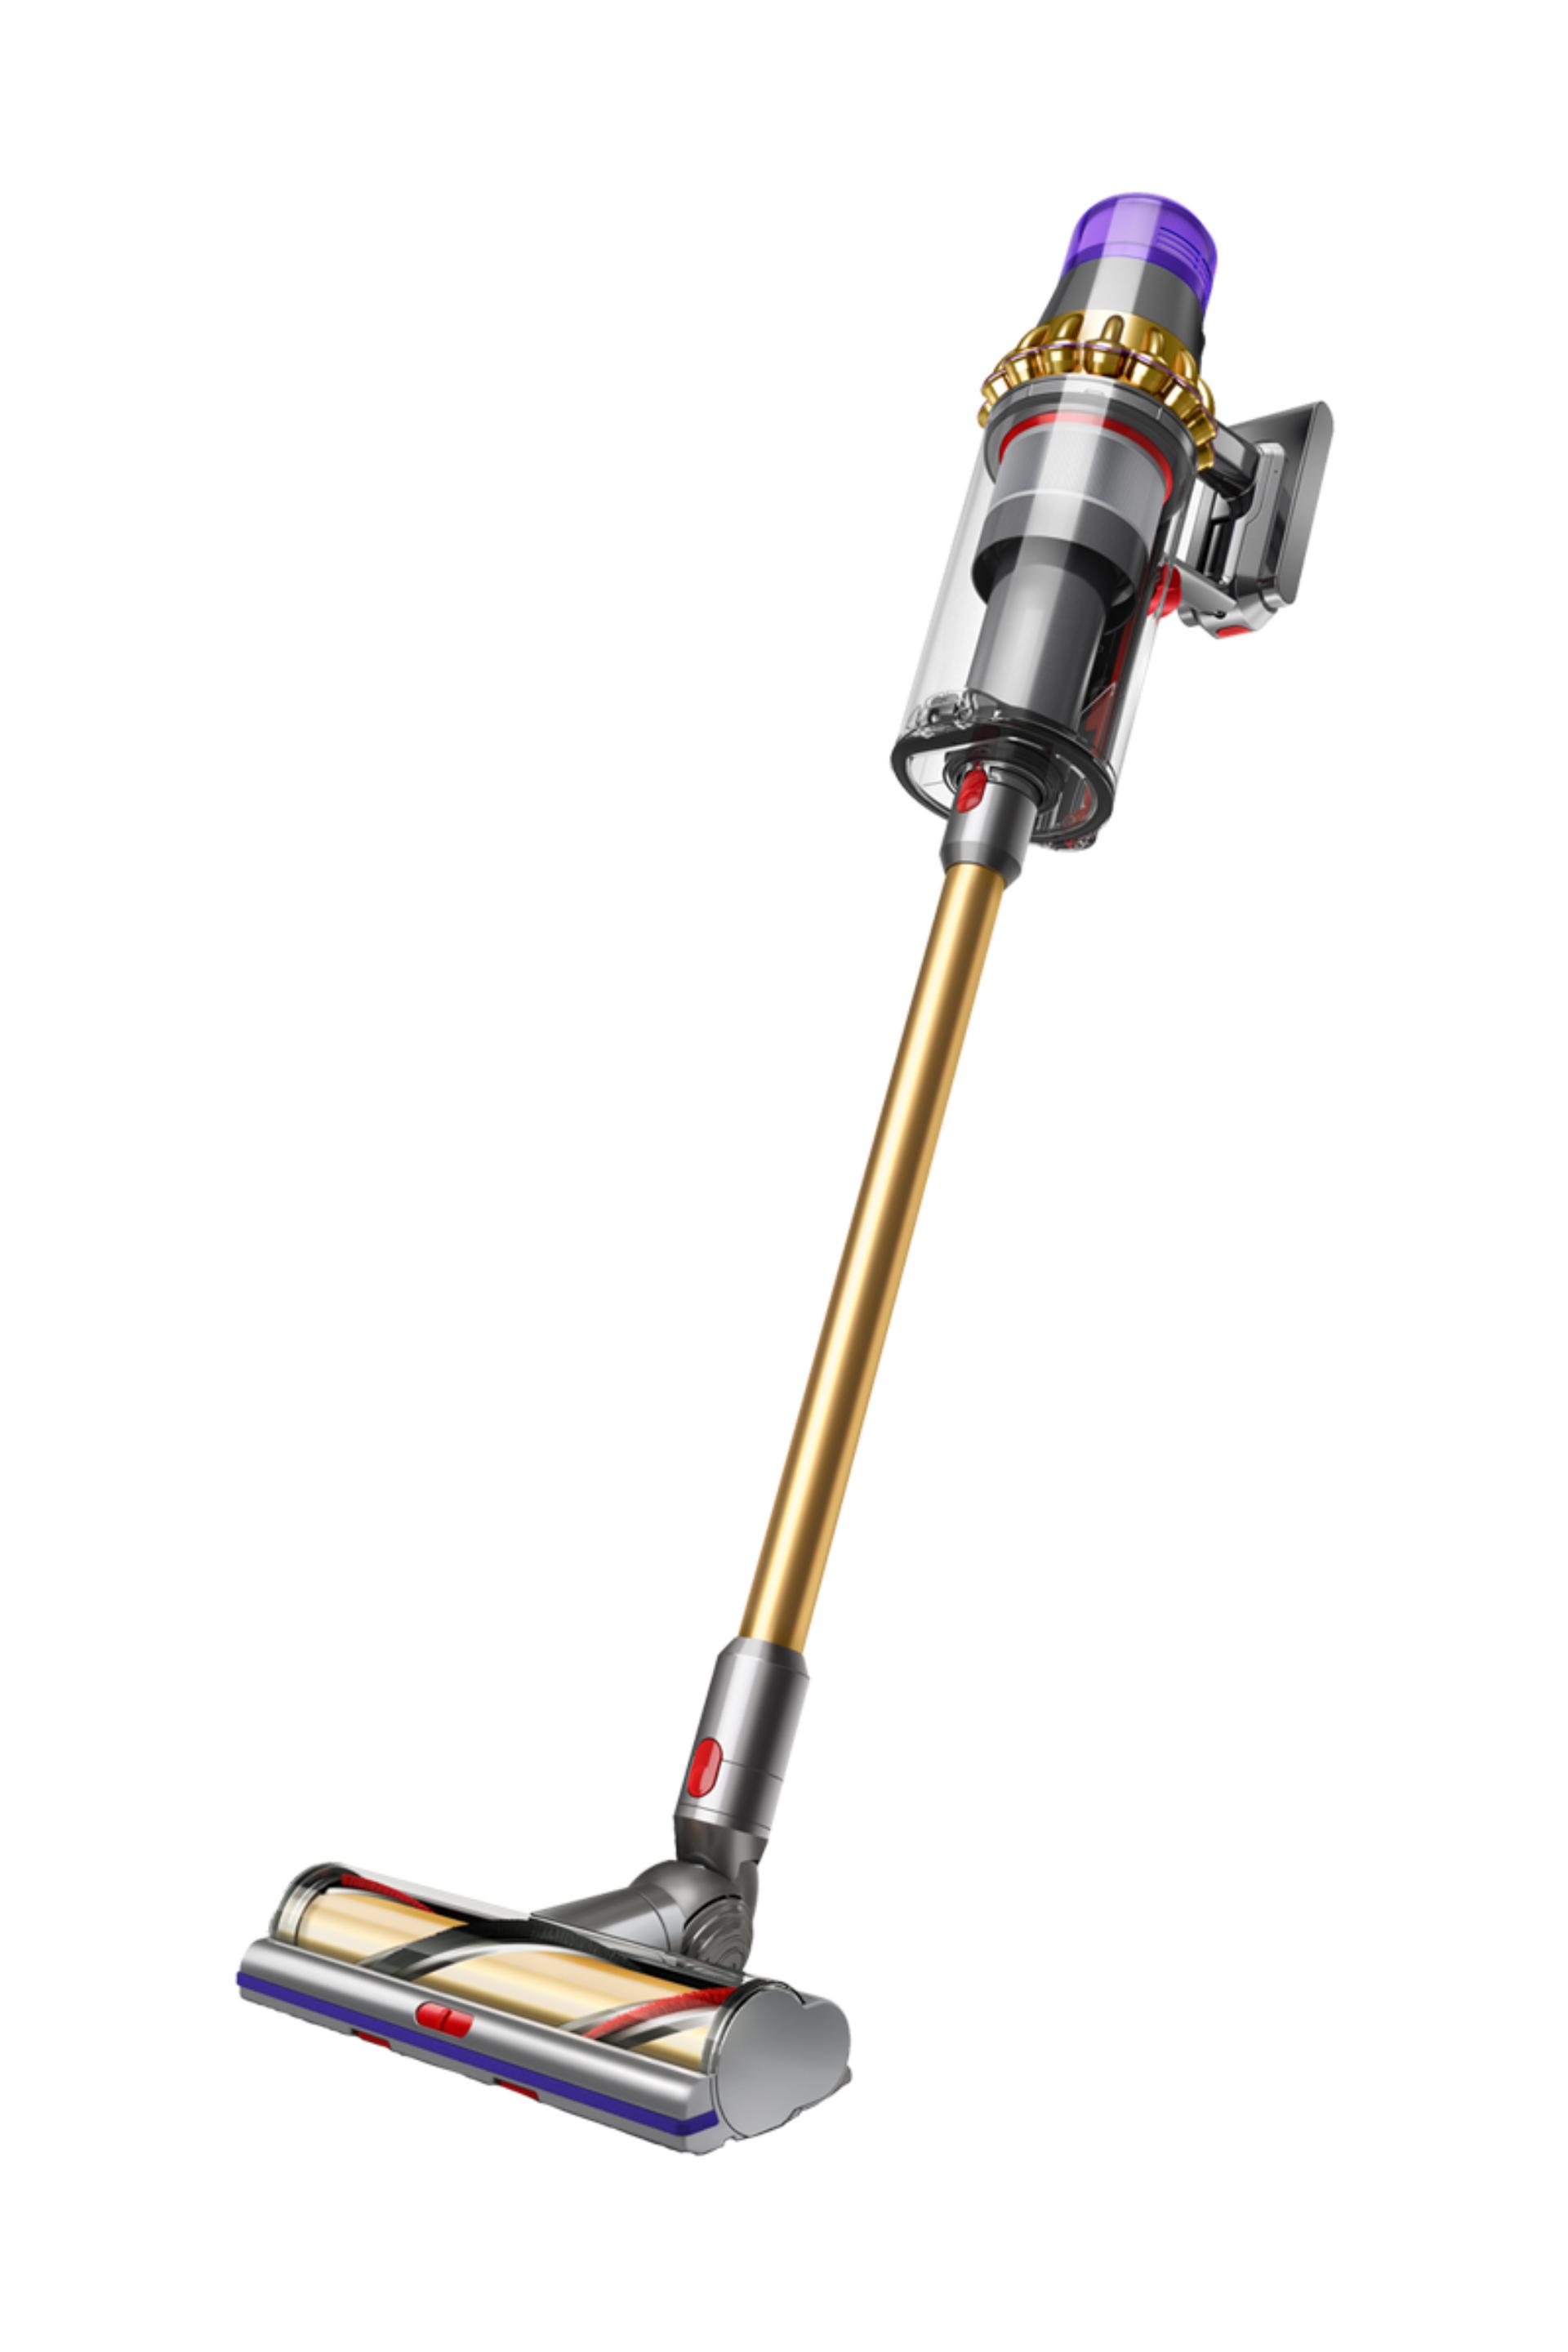 Dyson Vacuums and Hair Dryers - Great Black Friday Buys